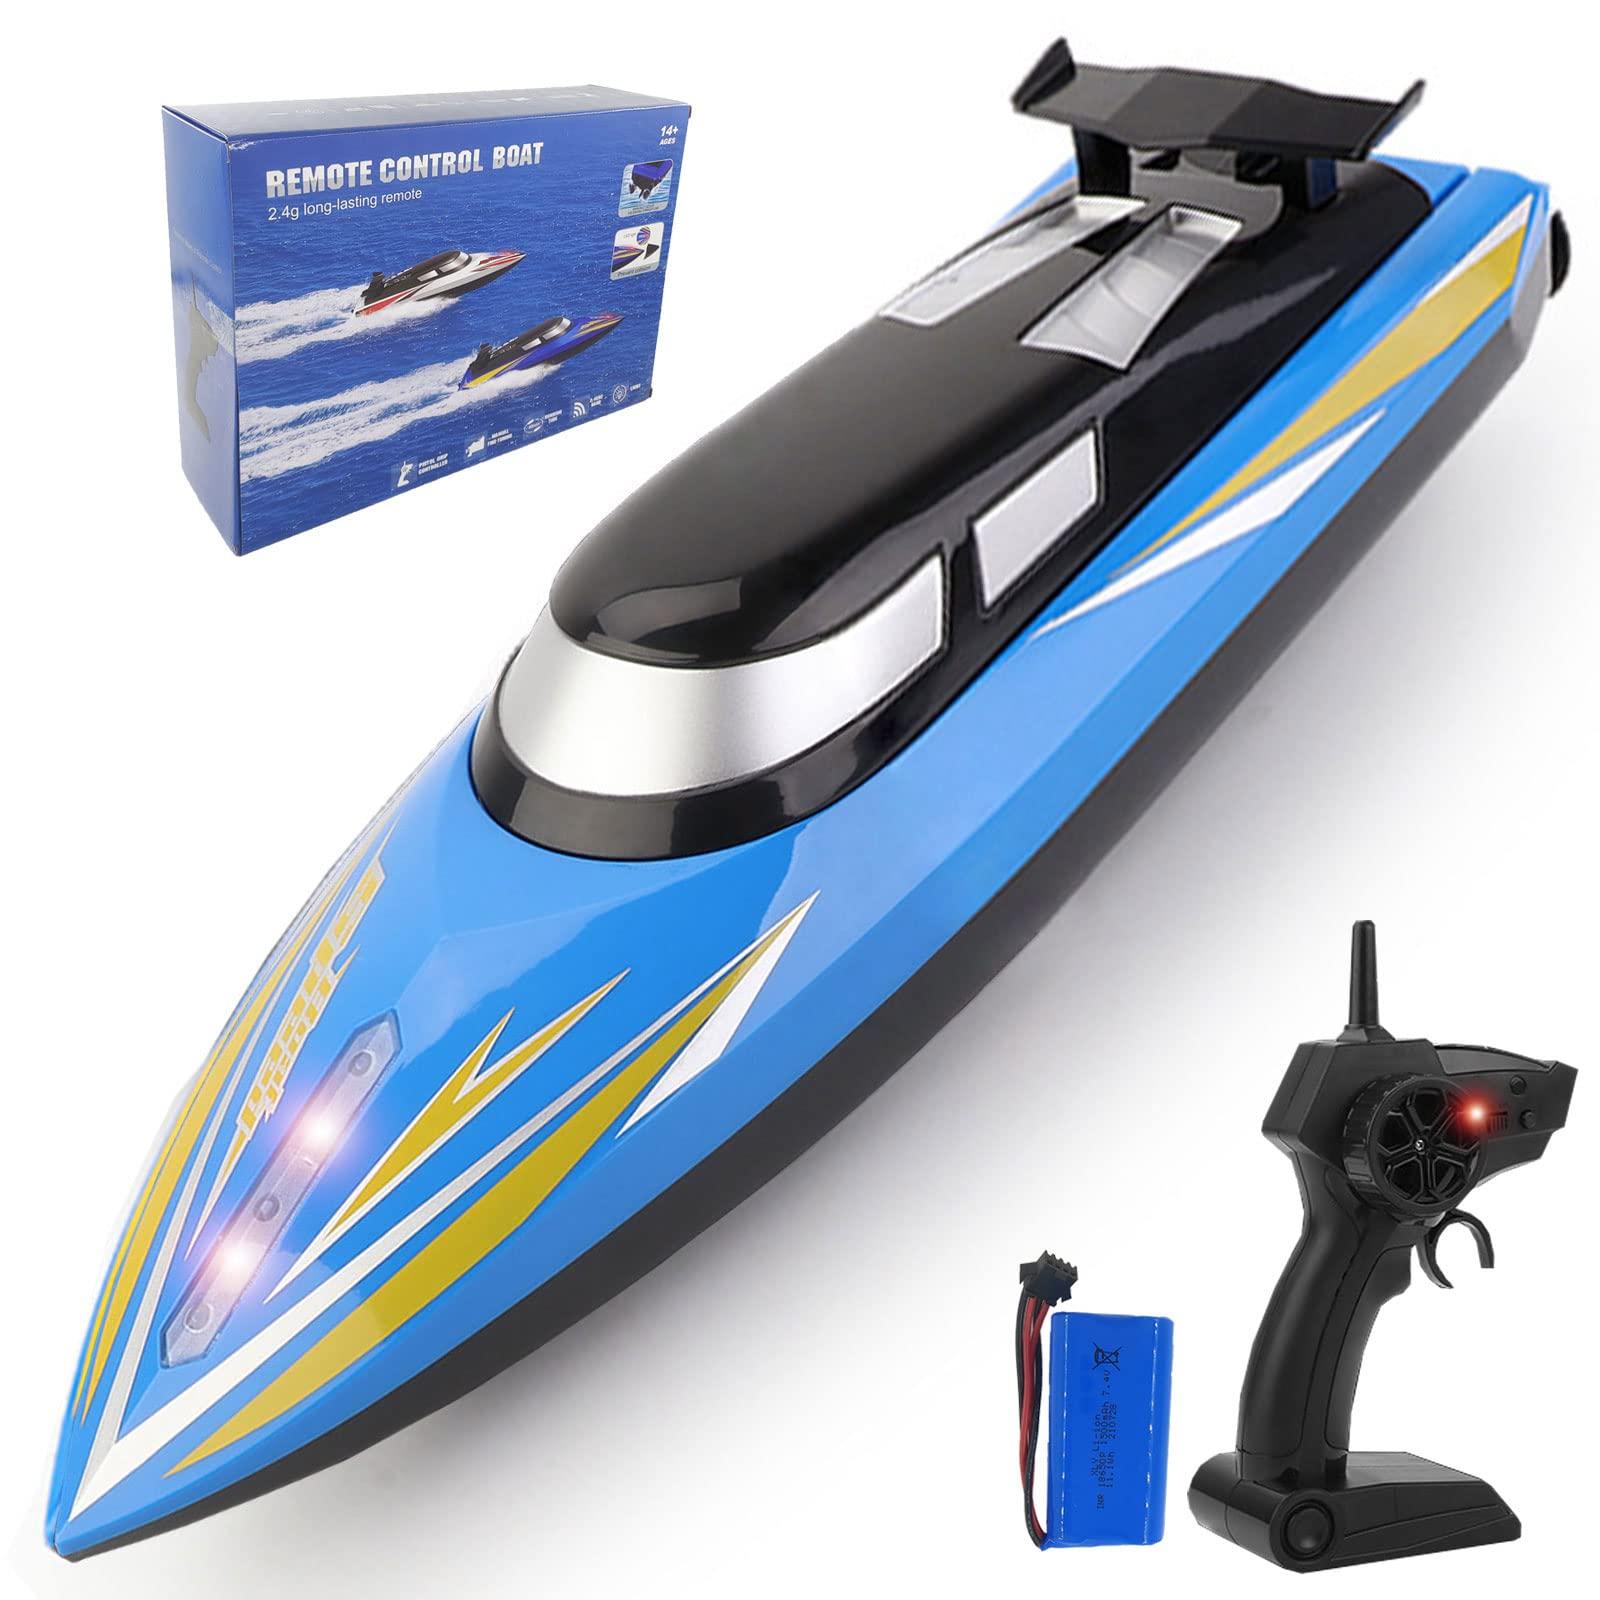 Long Range Rc Boat: Choosing the Right Remote Control System for Your Long Range RC Boat